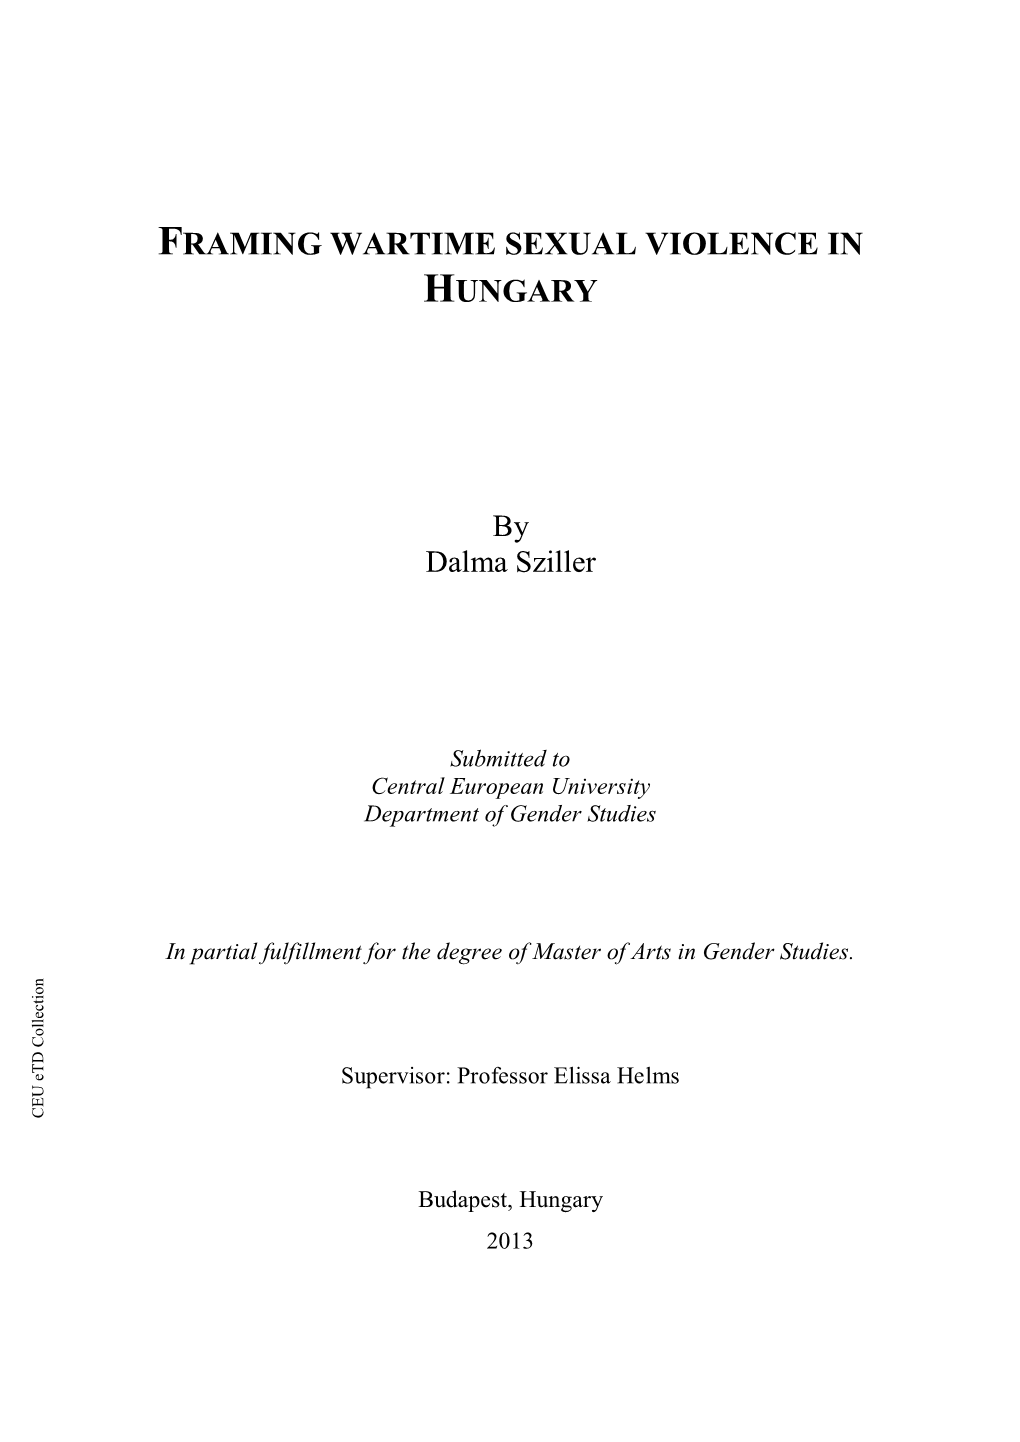 Framing Wartime Sexual Violence in Hungary